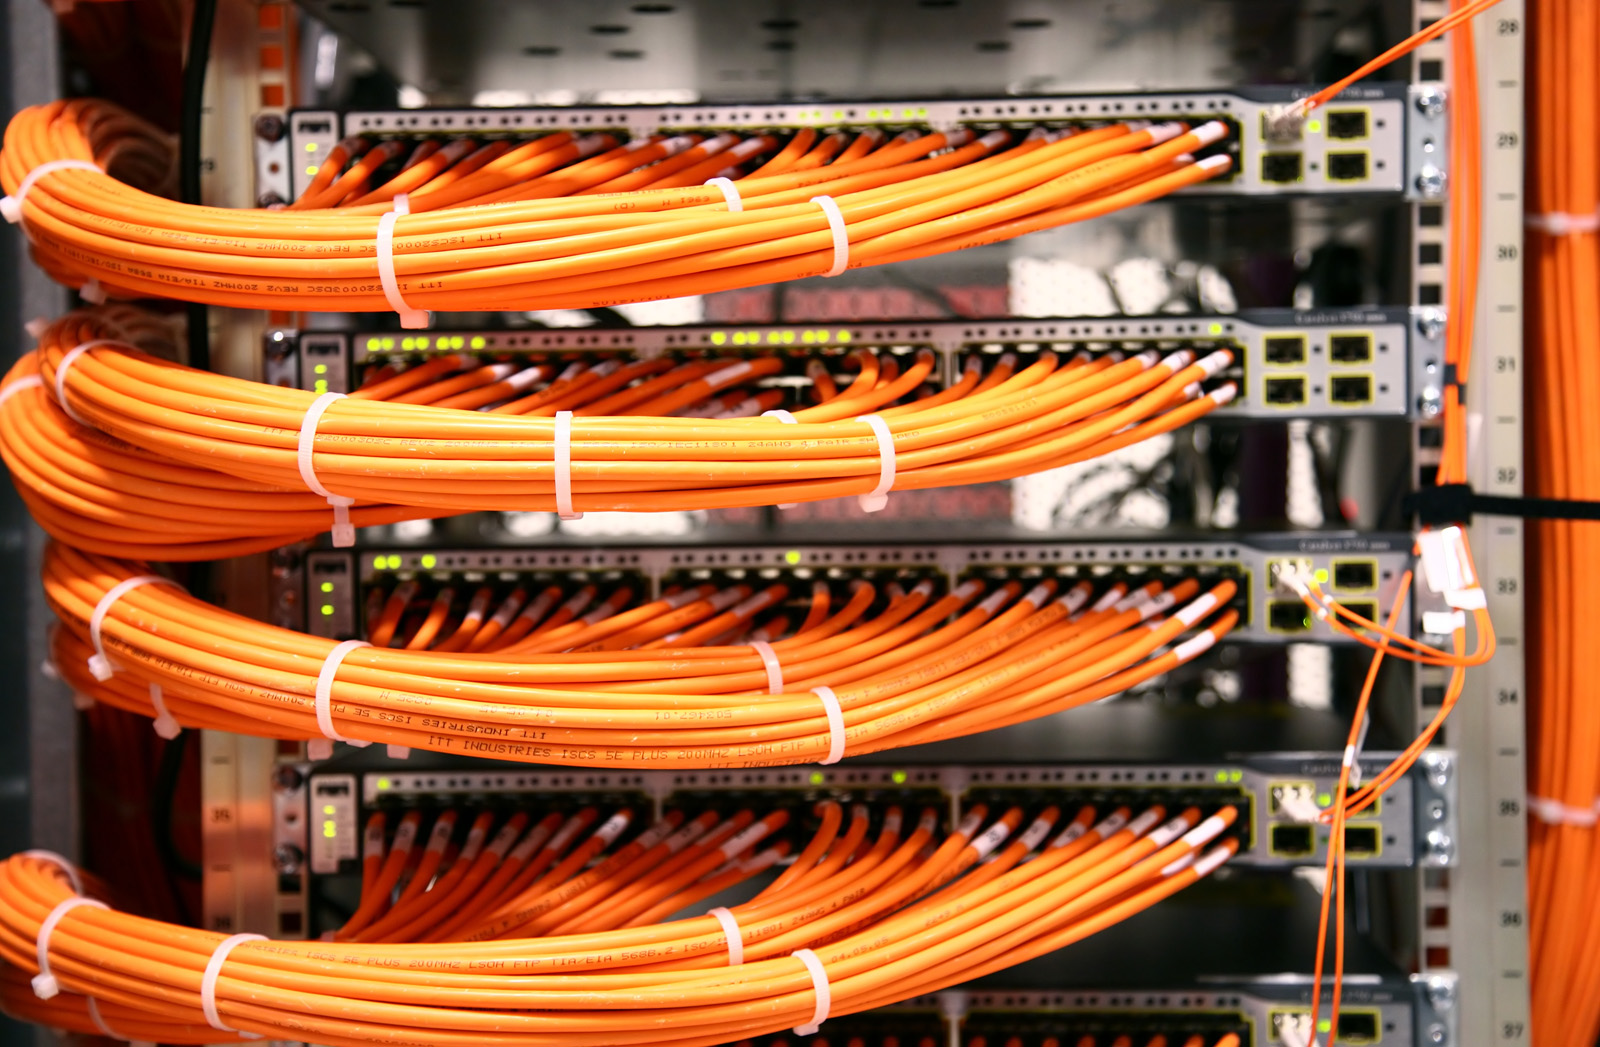 Plantation Florida Trusted Voice & Data Network Cabling Solutions